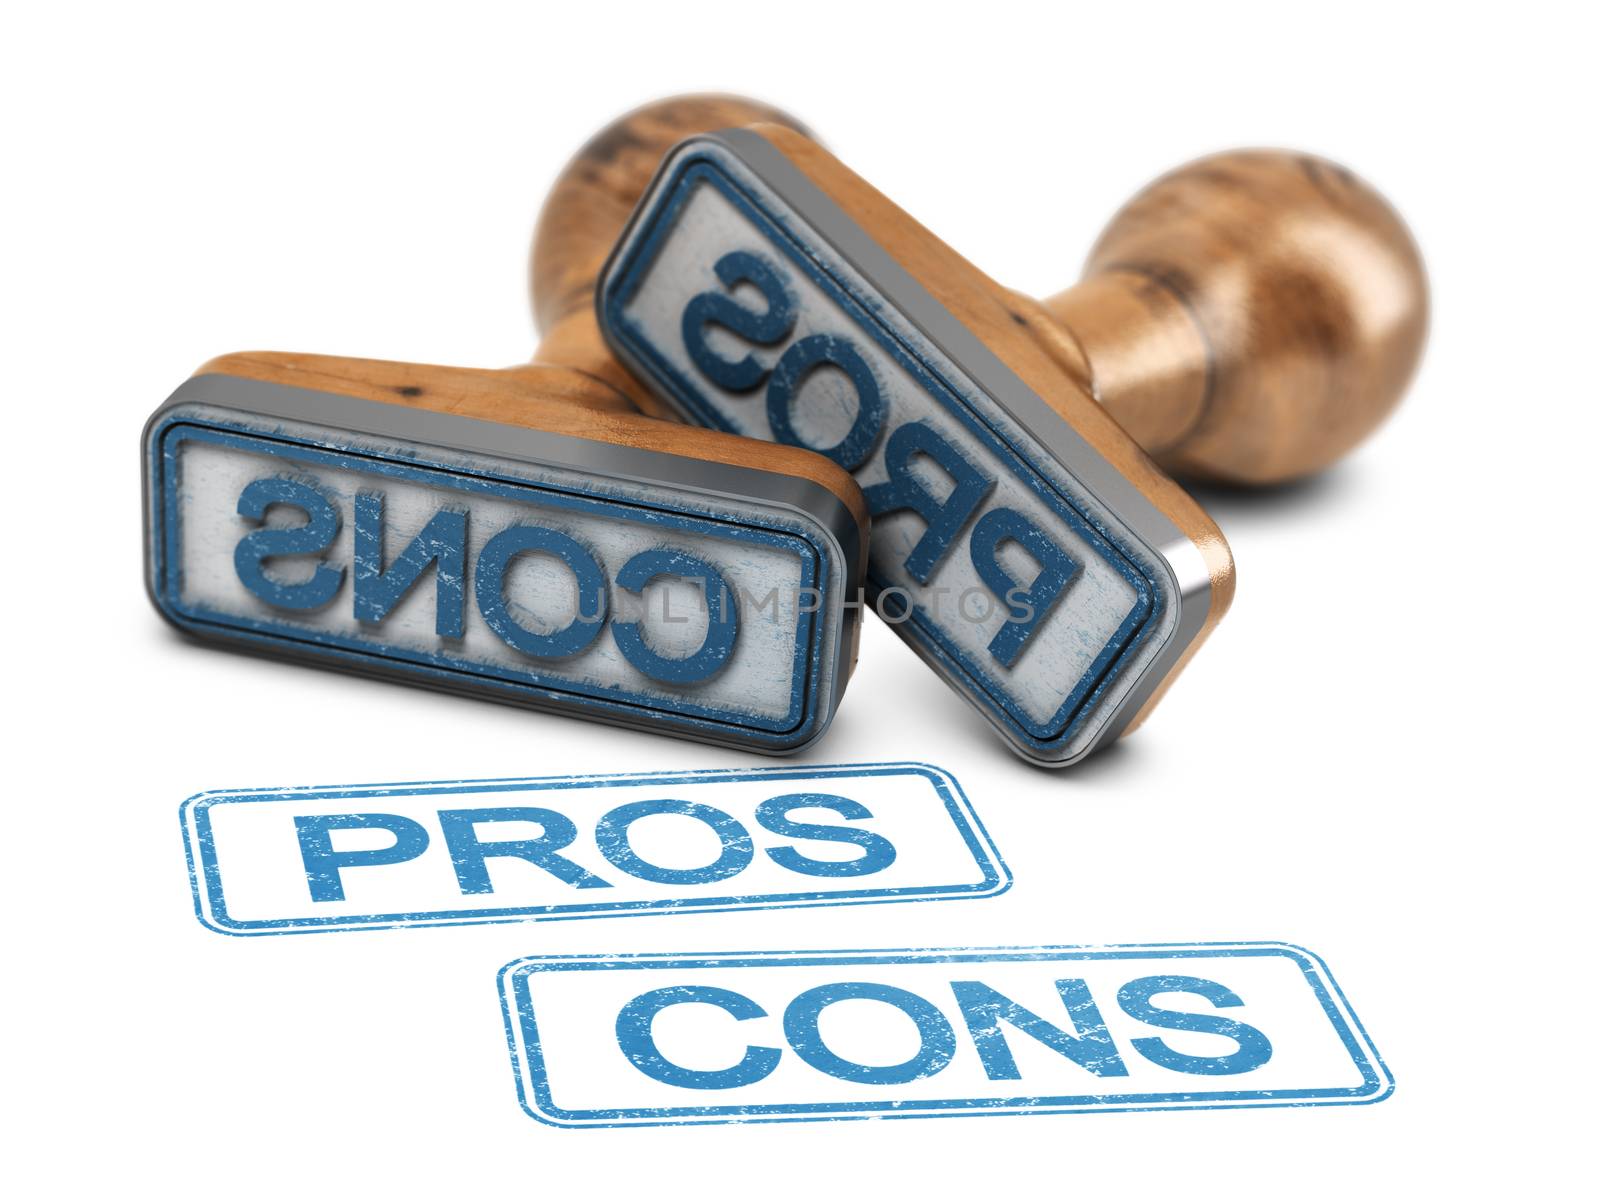 Pros and cons rubber stamps over white background. by Olivier-Le-Moal